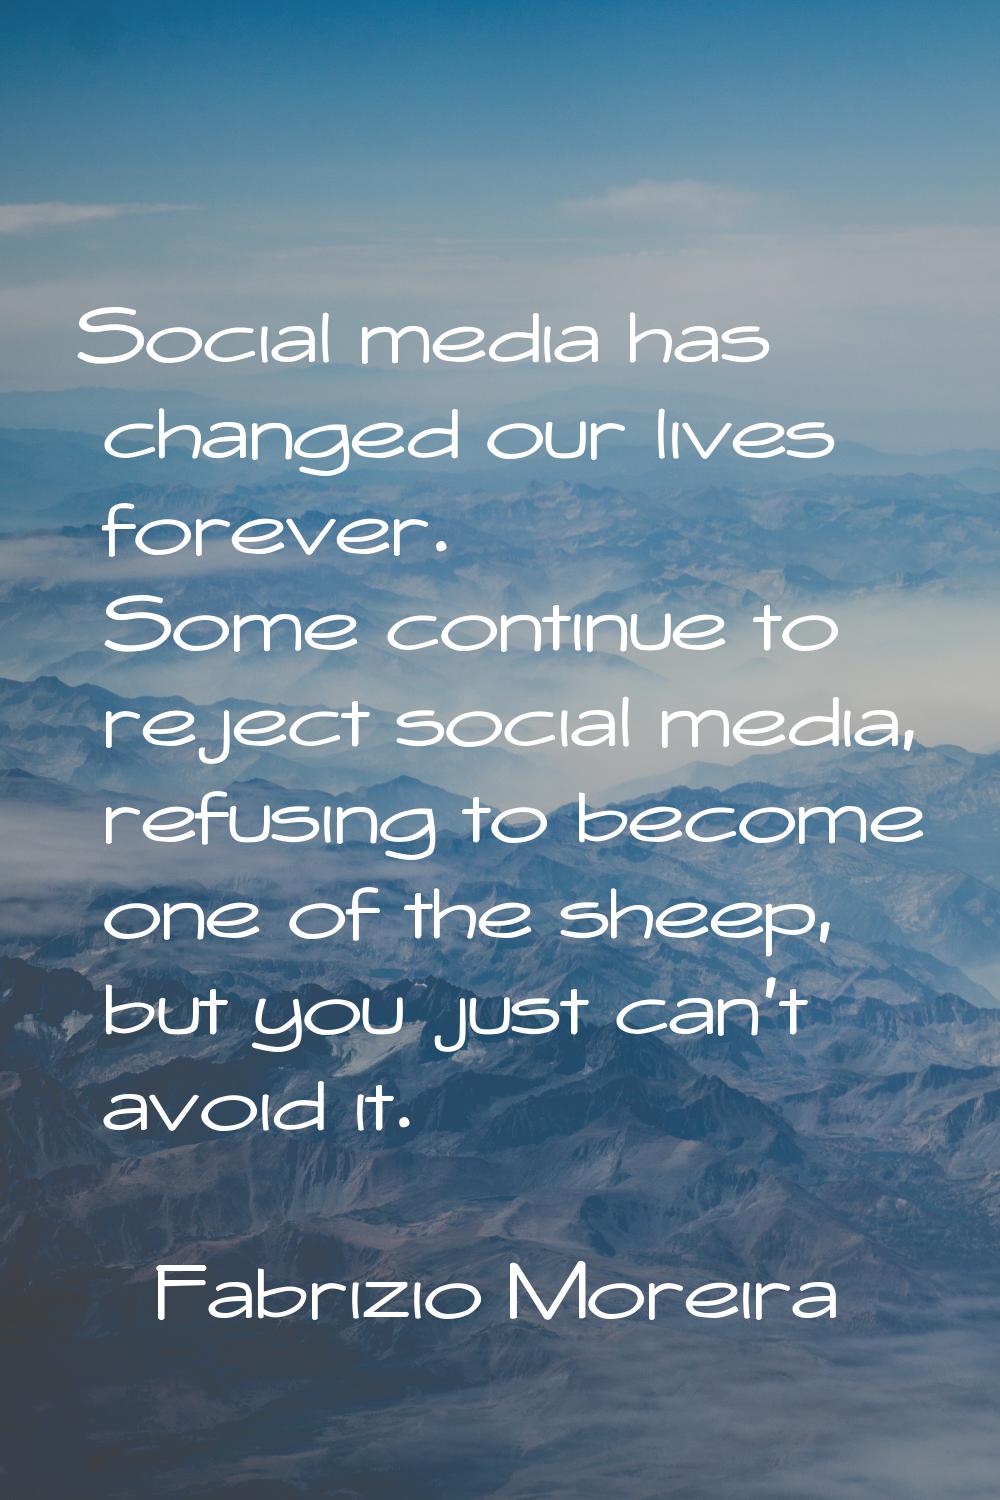 Social media has changed our lives forever. Some continue to reject social media, refusing to becom